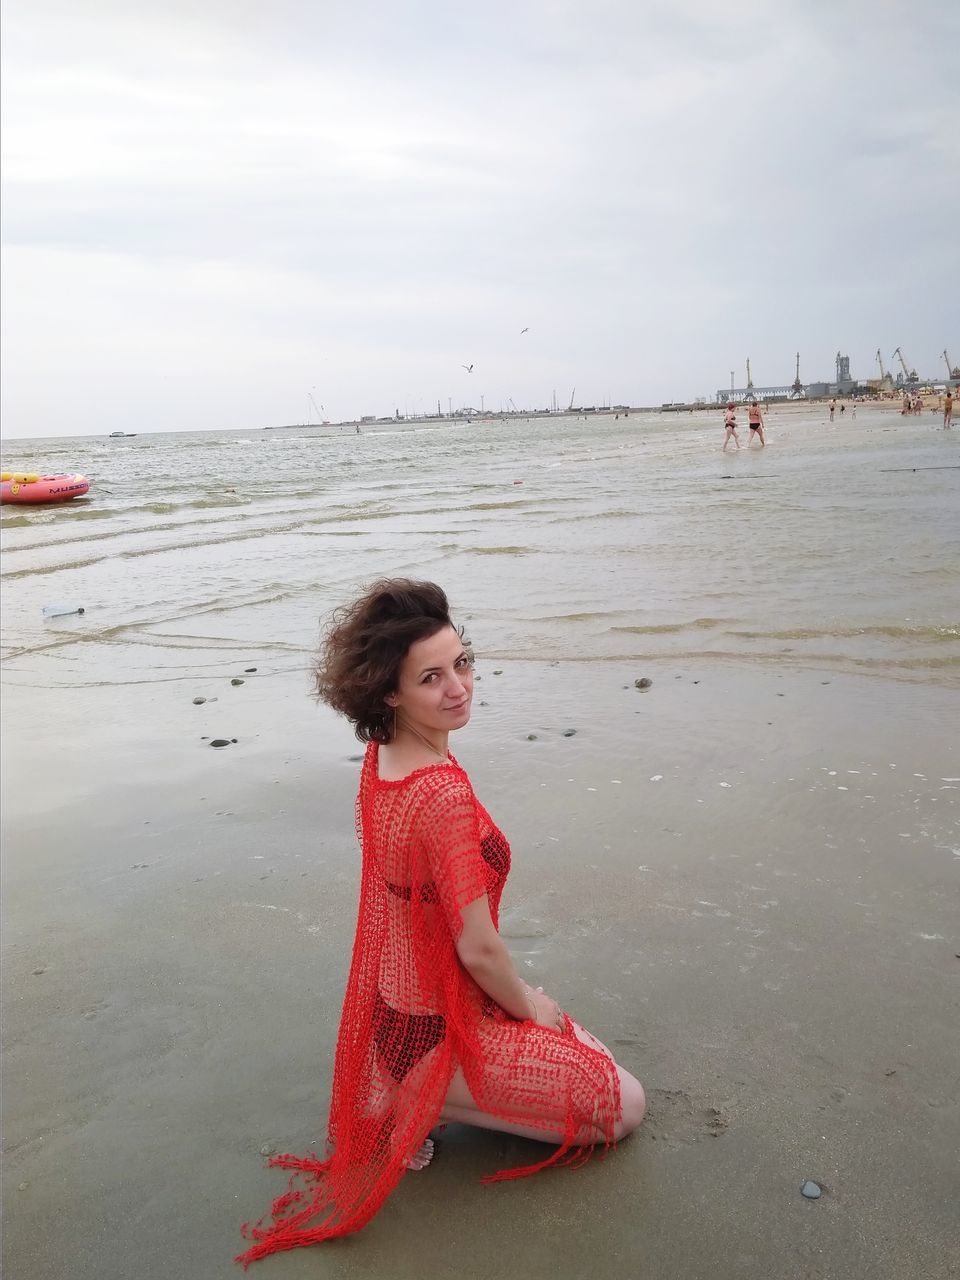 water, sky, beach, one person, real people, sea, land, lifestyles, leisure activity, young women, young adult, casual clothing, beauty in nature, nature, red, scenics - nature, day, beautiful woman, outdoors, hairstyle